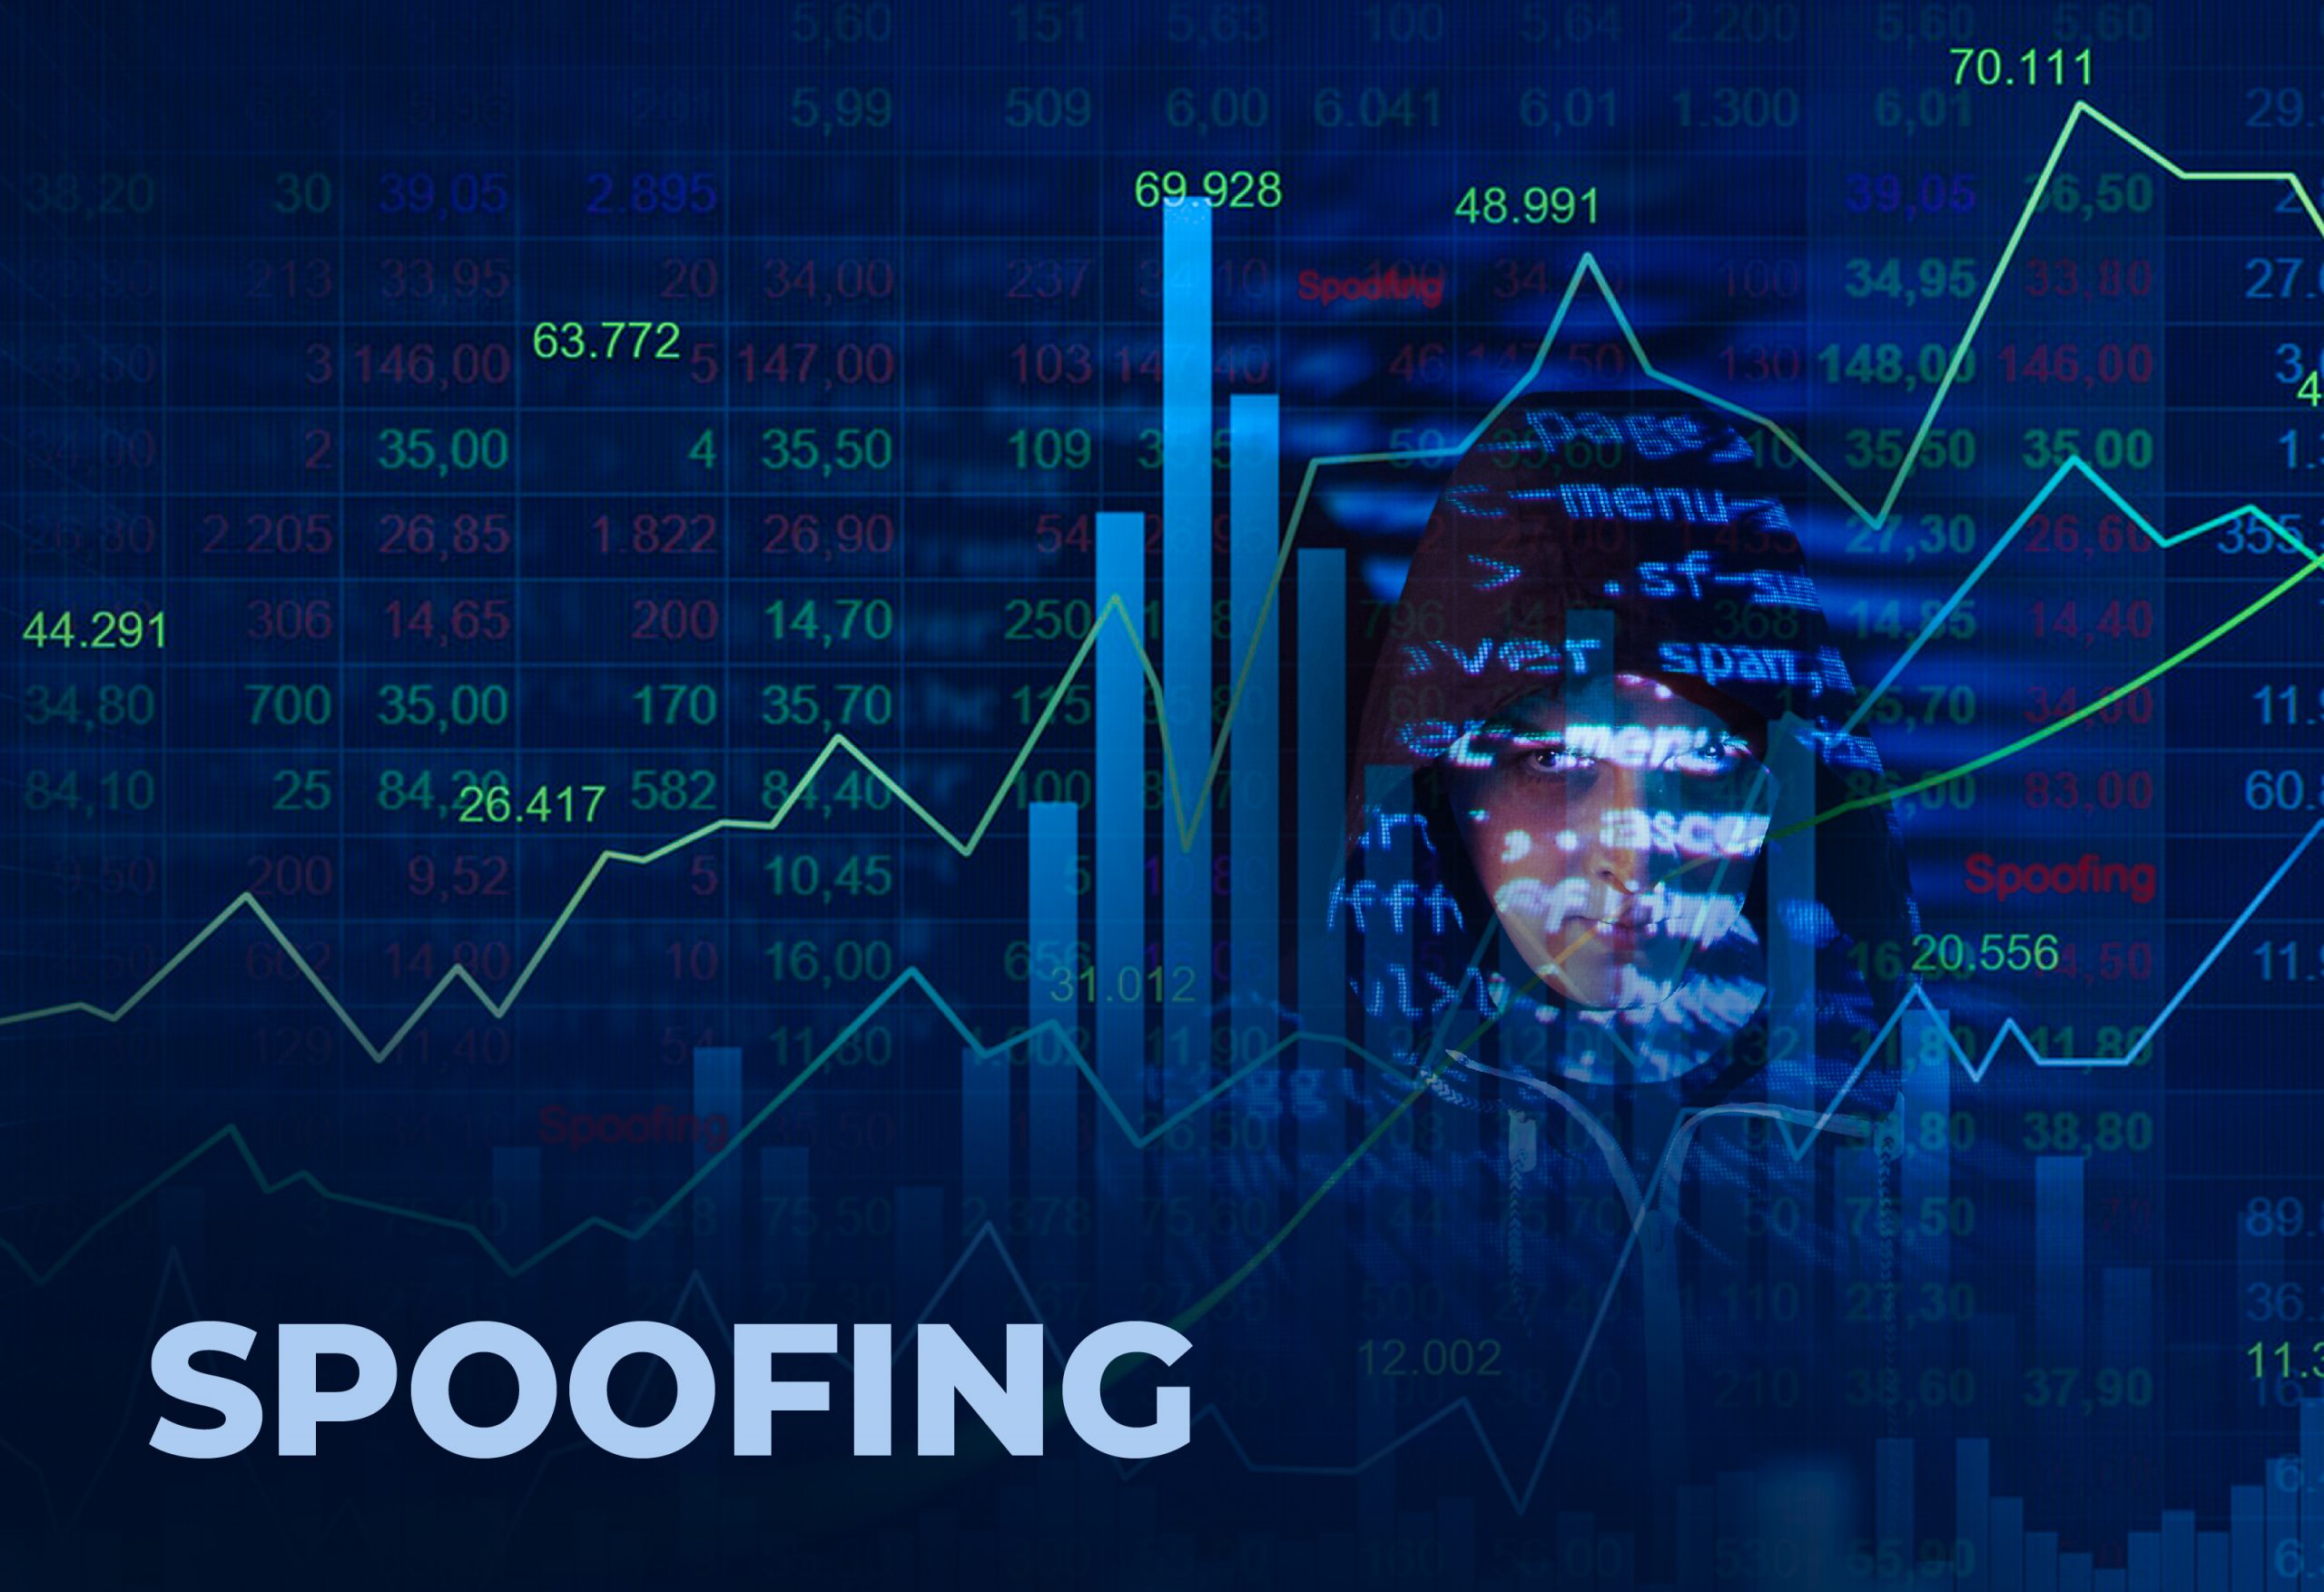 What is Spoofing in the financial markets?